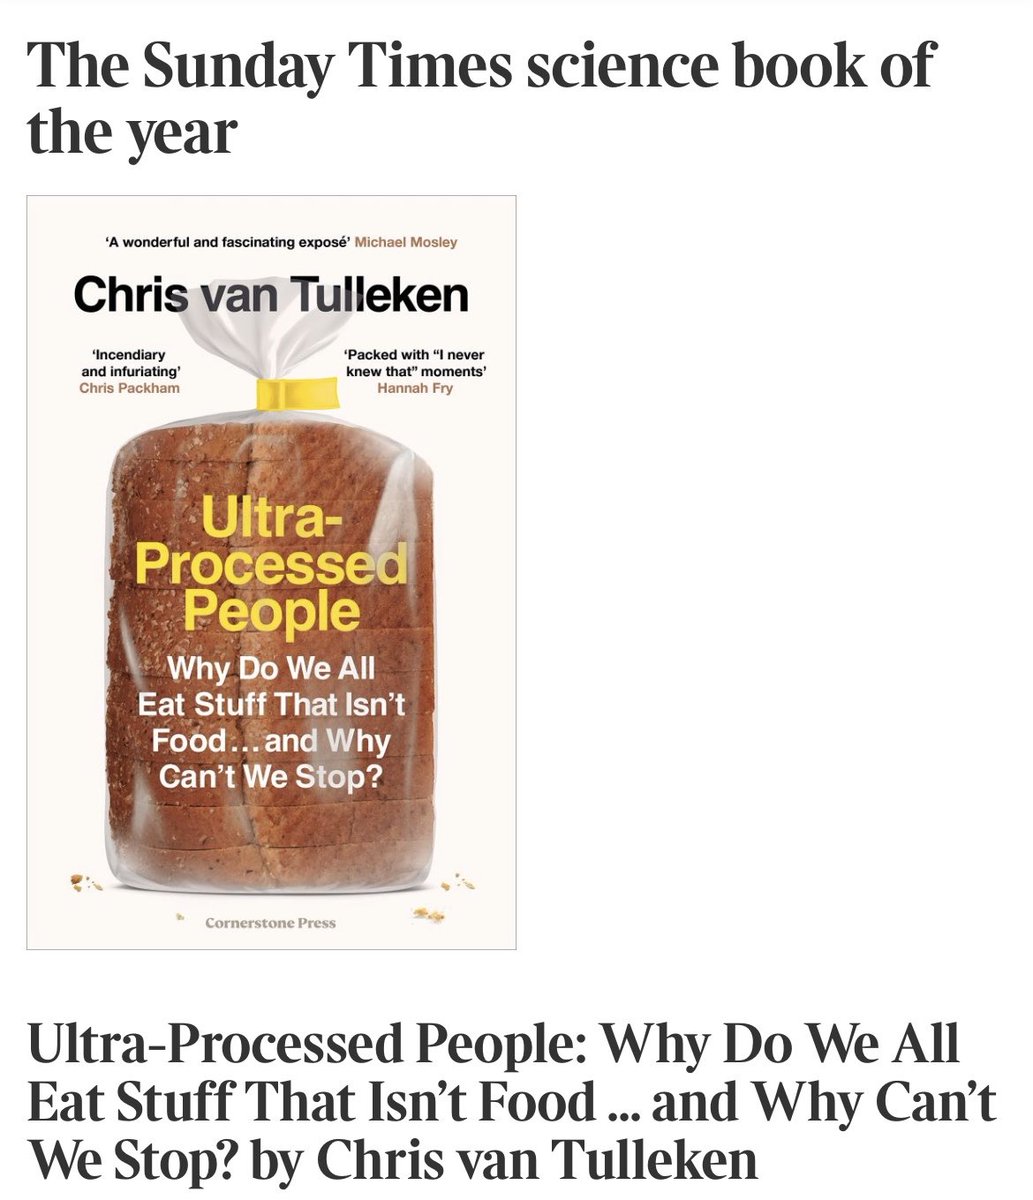 Ultra-Processed People is the @thetimes science book of the year. Hard to express how much this means to me - thanks to the hundreds of contributors and collaborators who did the research it is based on, and who continue to demand that real food is made affordable and available.